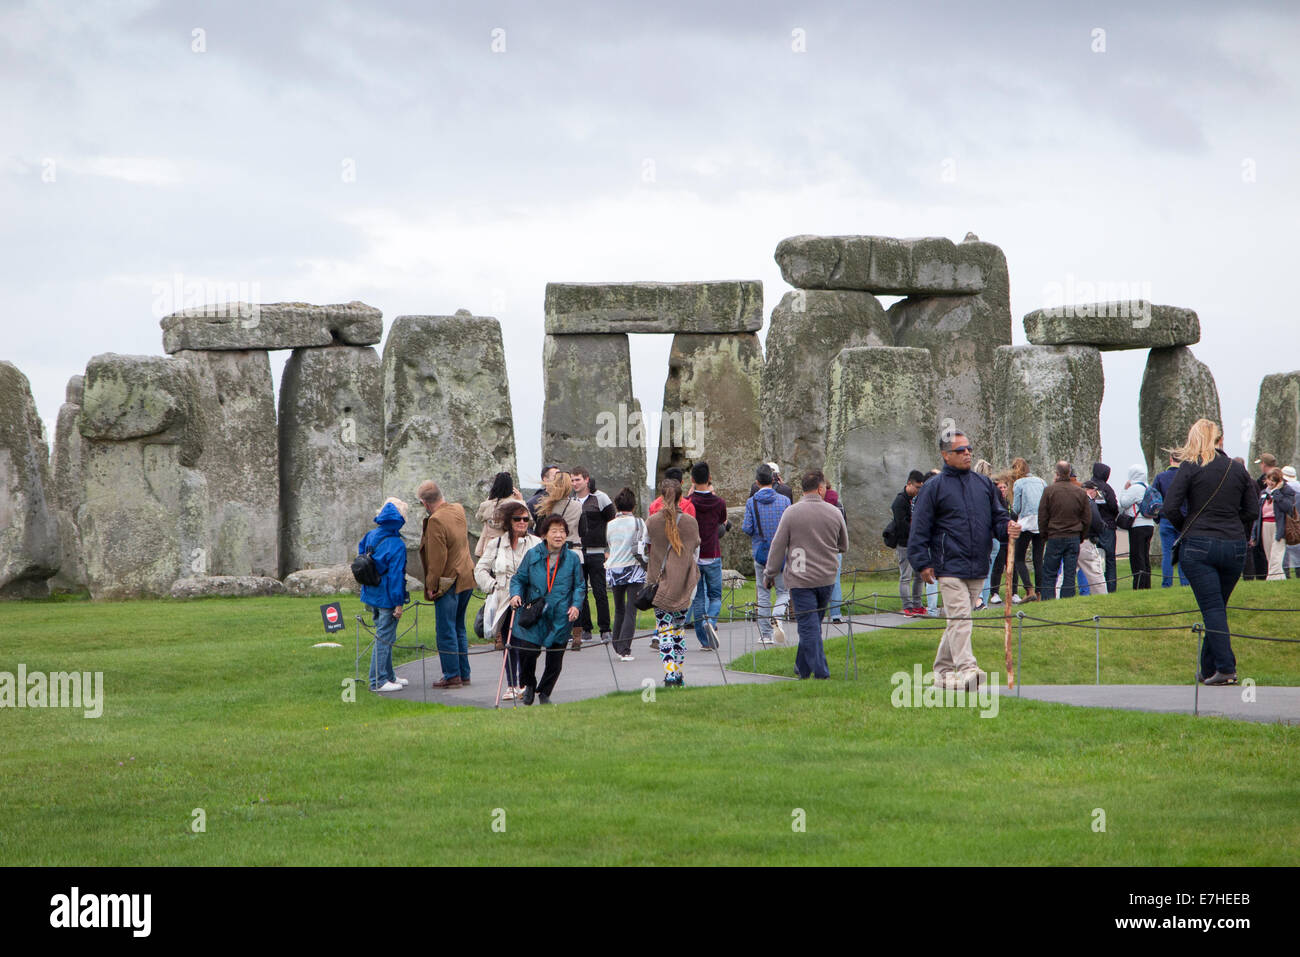 Visit to Stonehenge / Stone Henge with tourists / tourist visitors visiting and viewing the monument. UK. Stock Photo